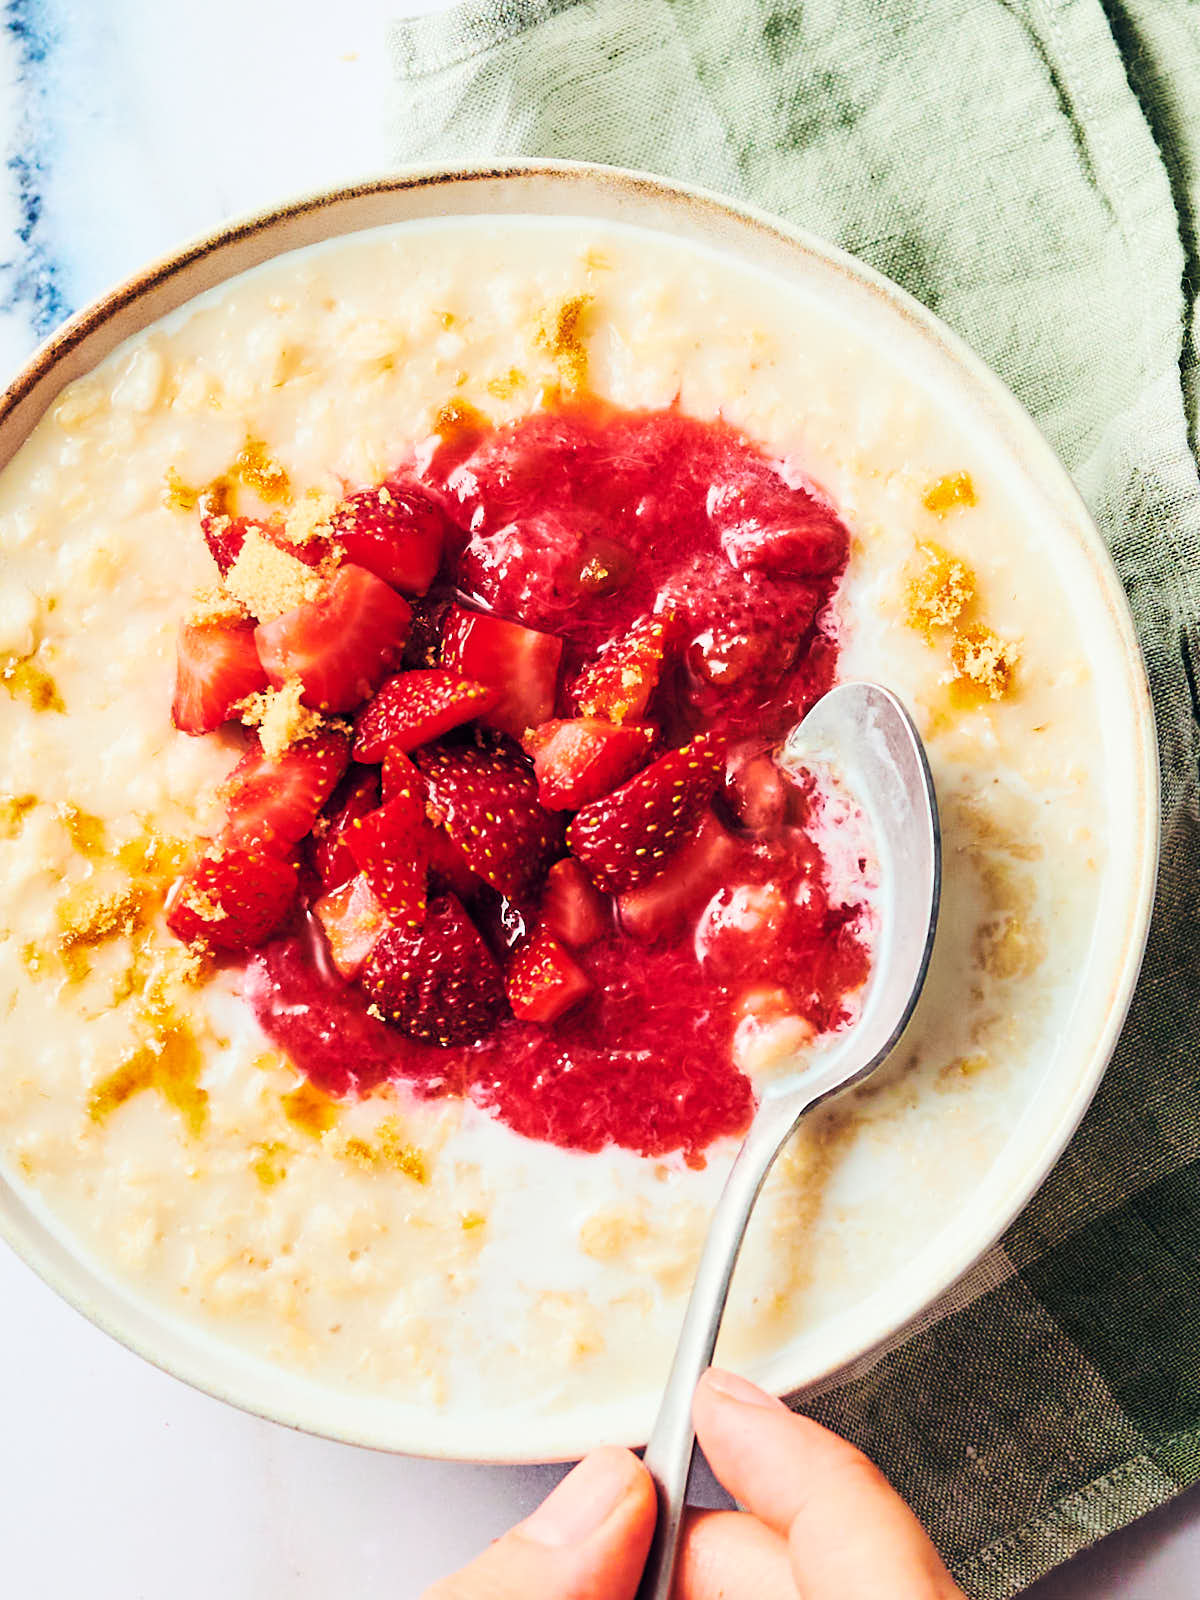 Oatmeal topped with Strawberry Rhubarb Compote.